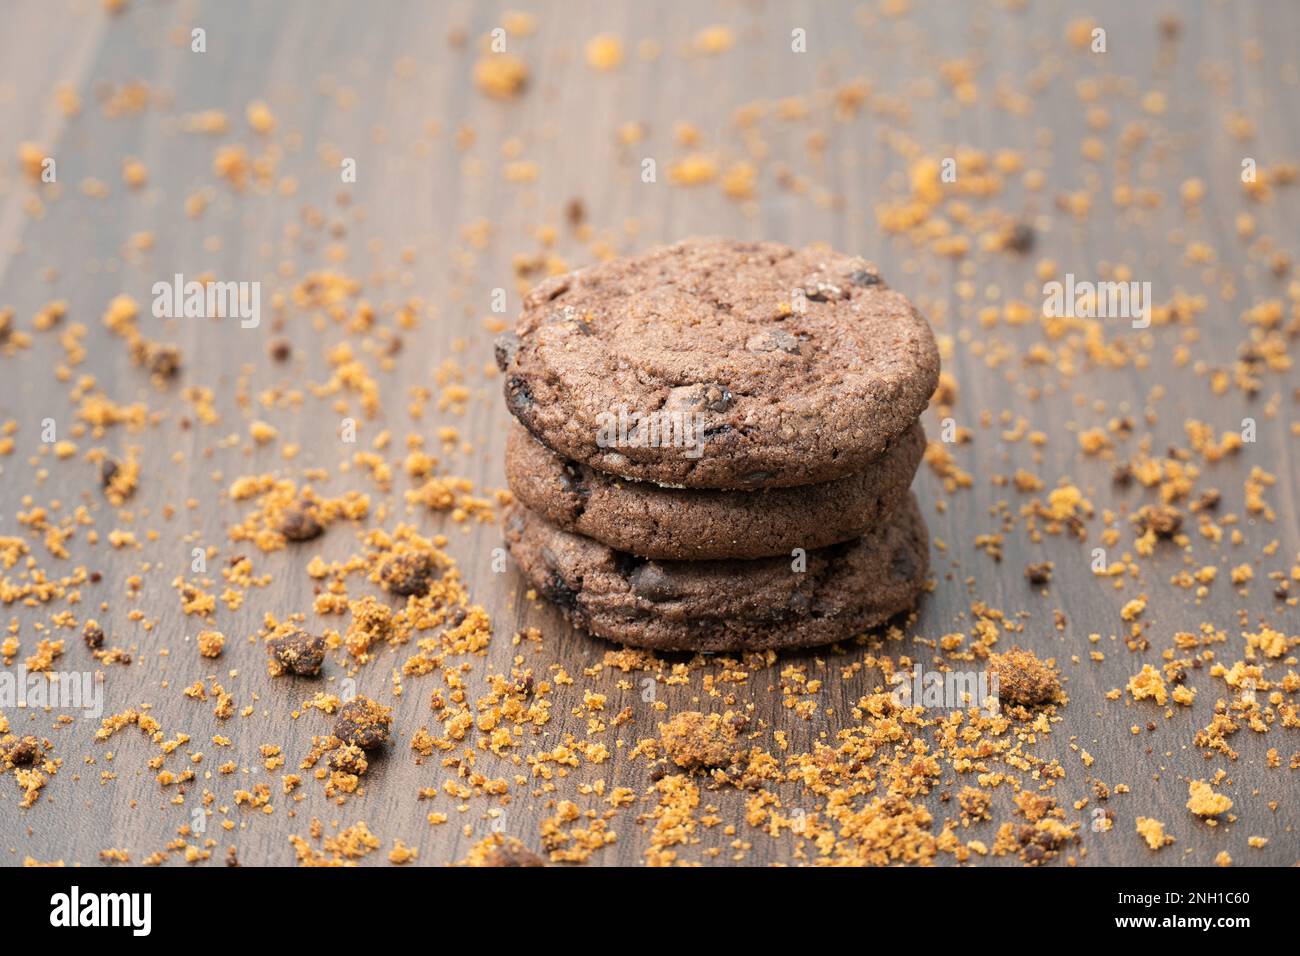 Chocolate chip Cookies isolated on textured background Stock Photo